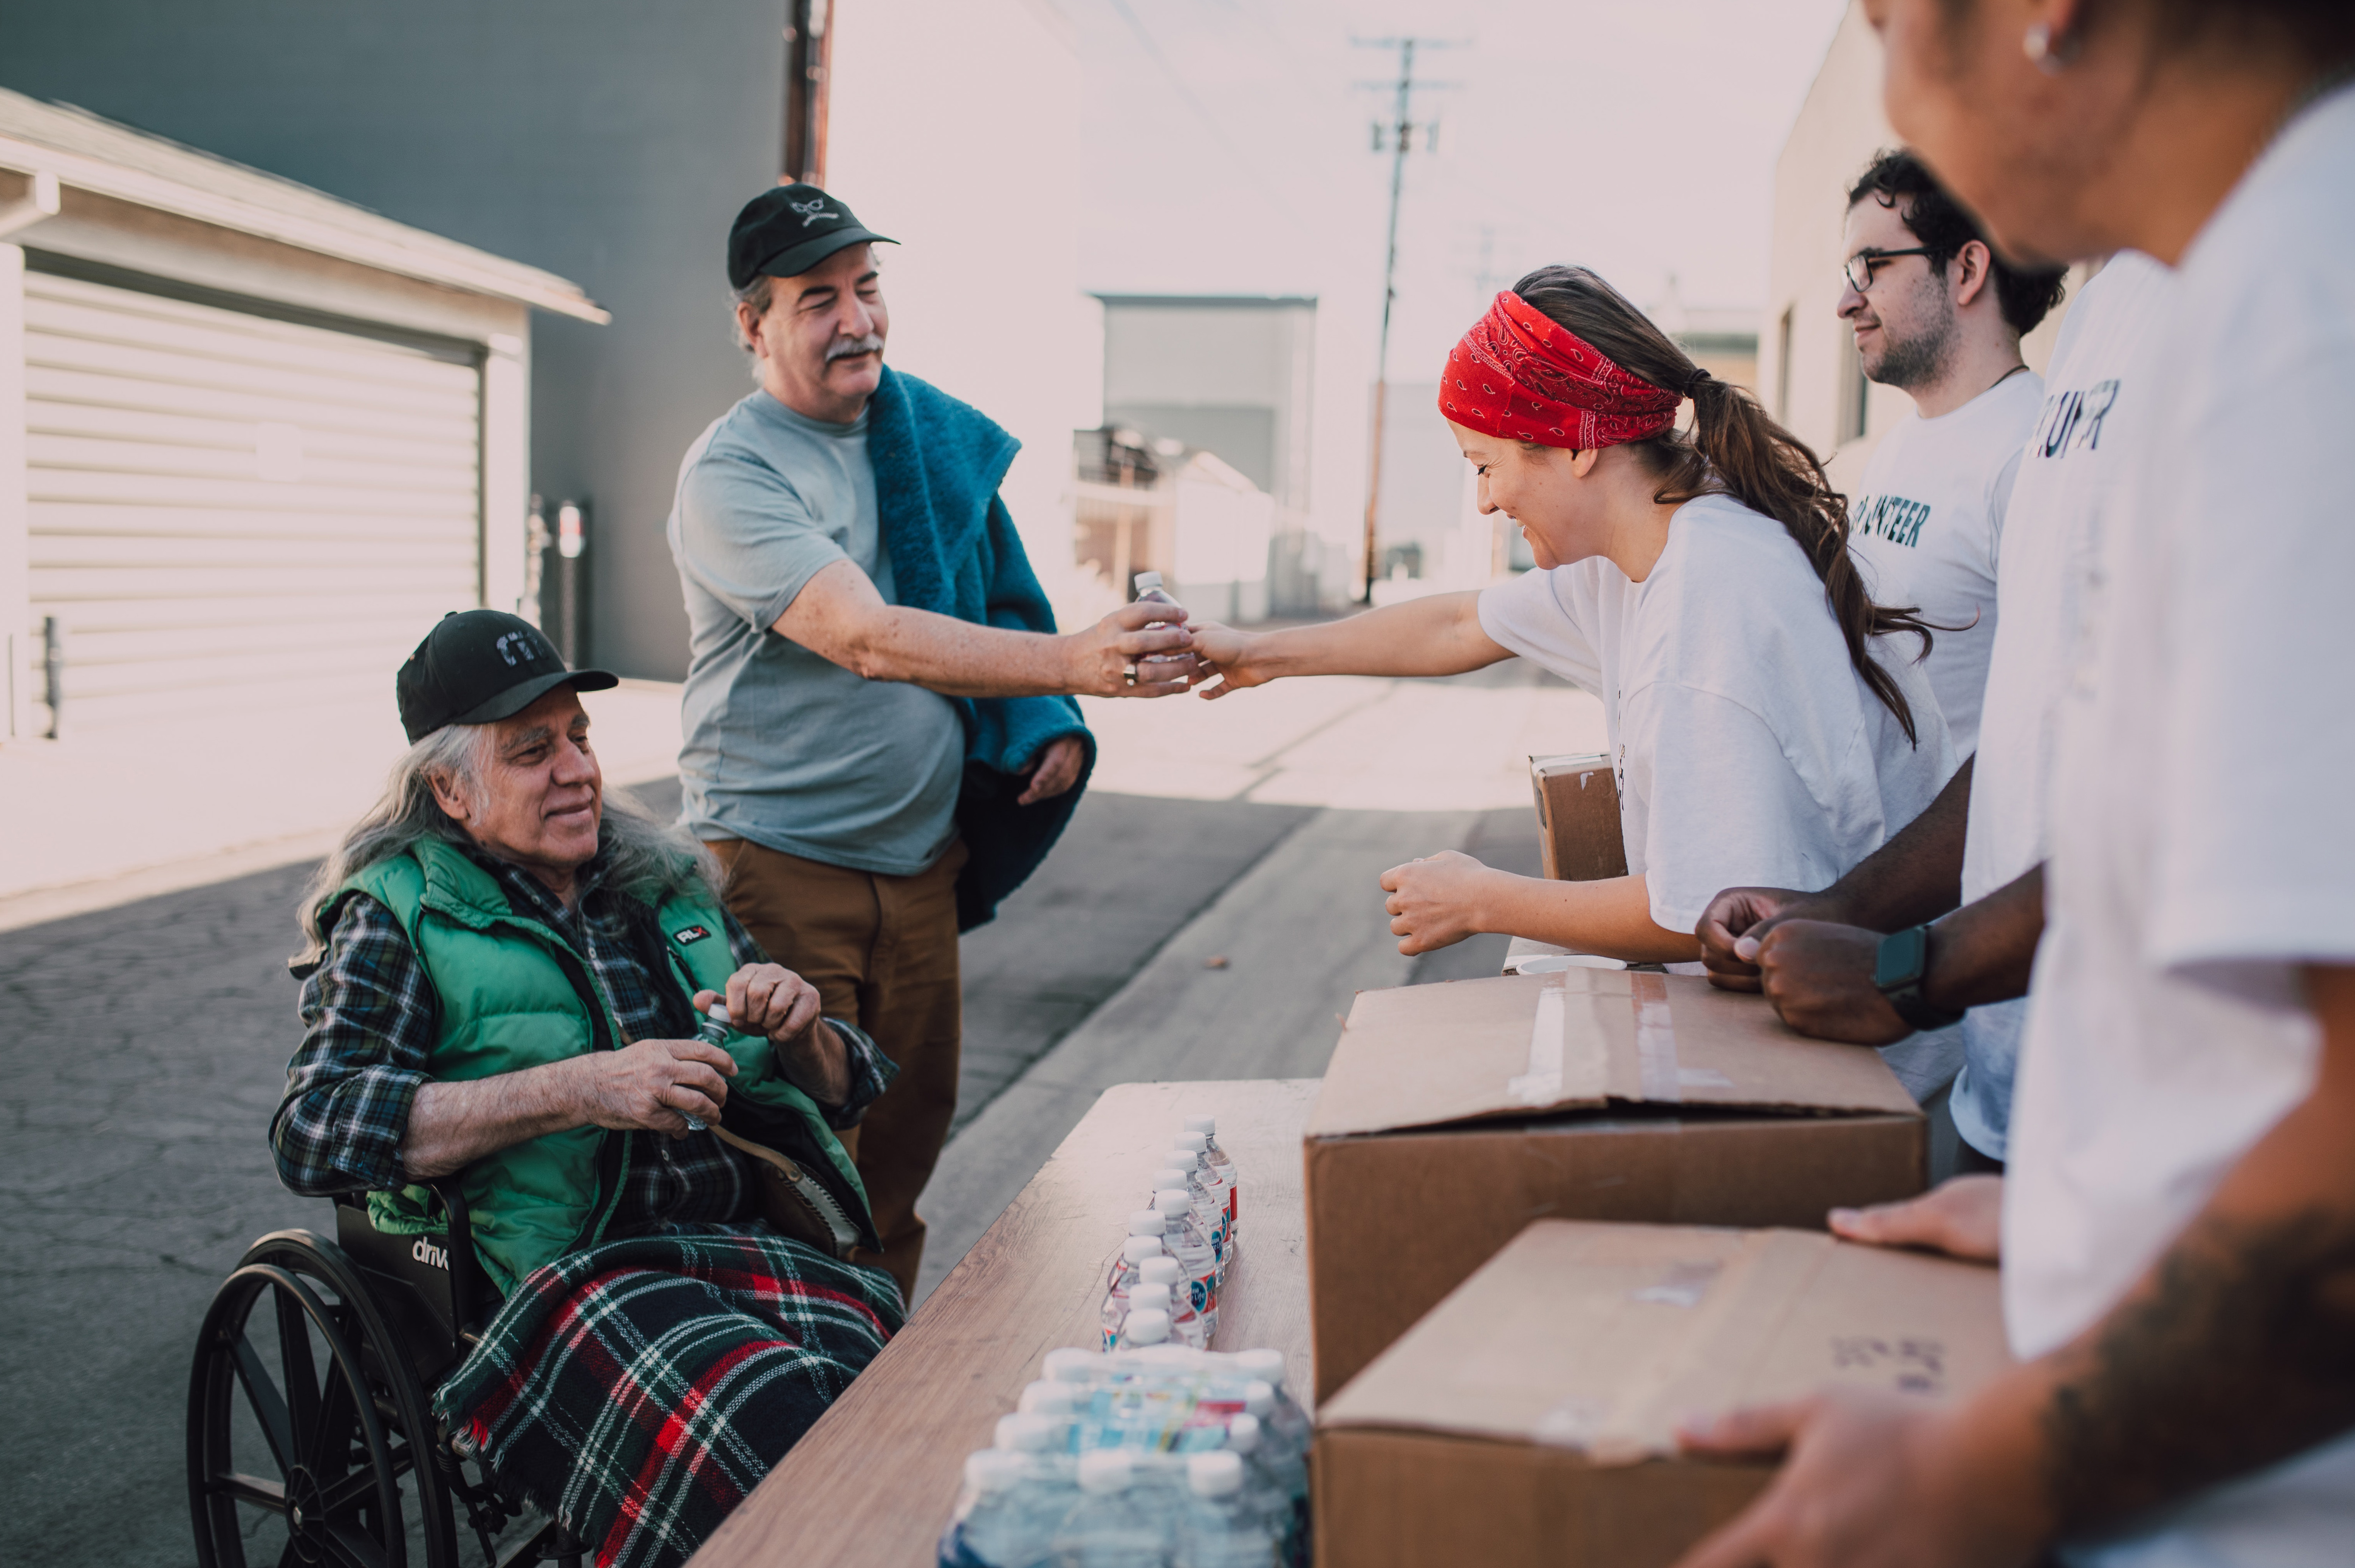 Volunteers handing out food and water bottles at a food bank.